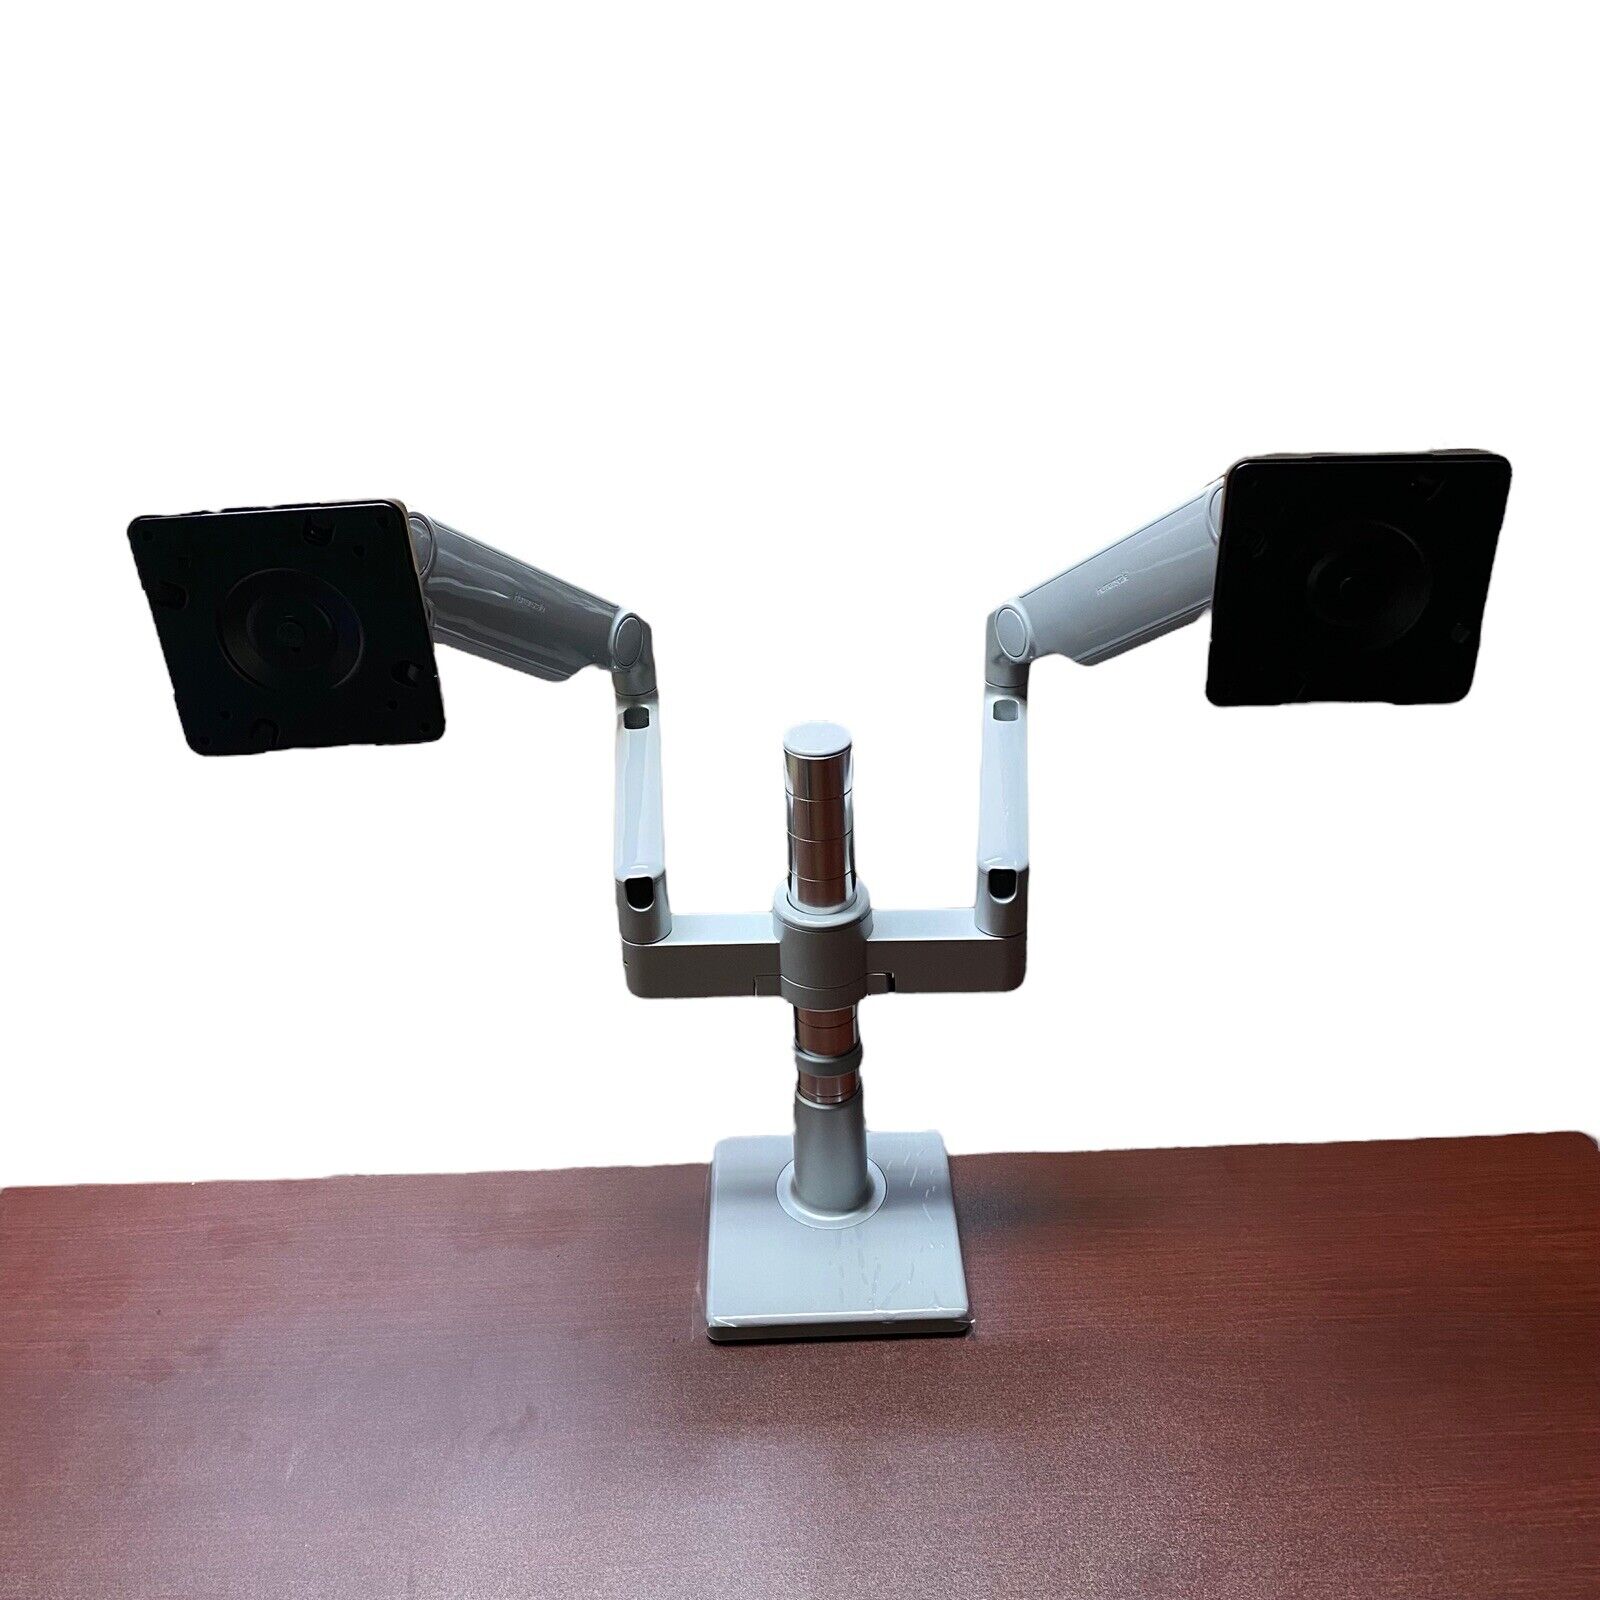 NEW HUMANSCALE M/FLEX M2.1 DUAL MONITOR ARMS DESK CLAMP MOUNT SILVER GREY $900+